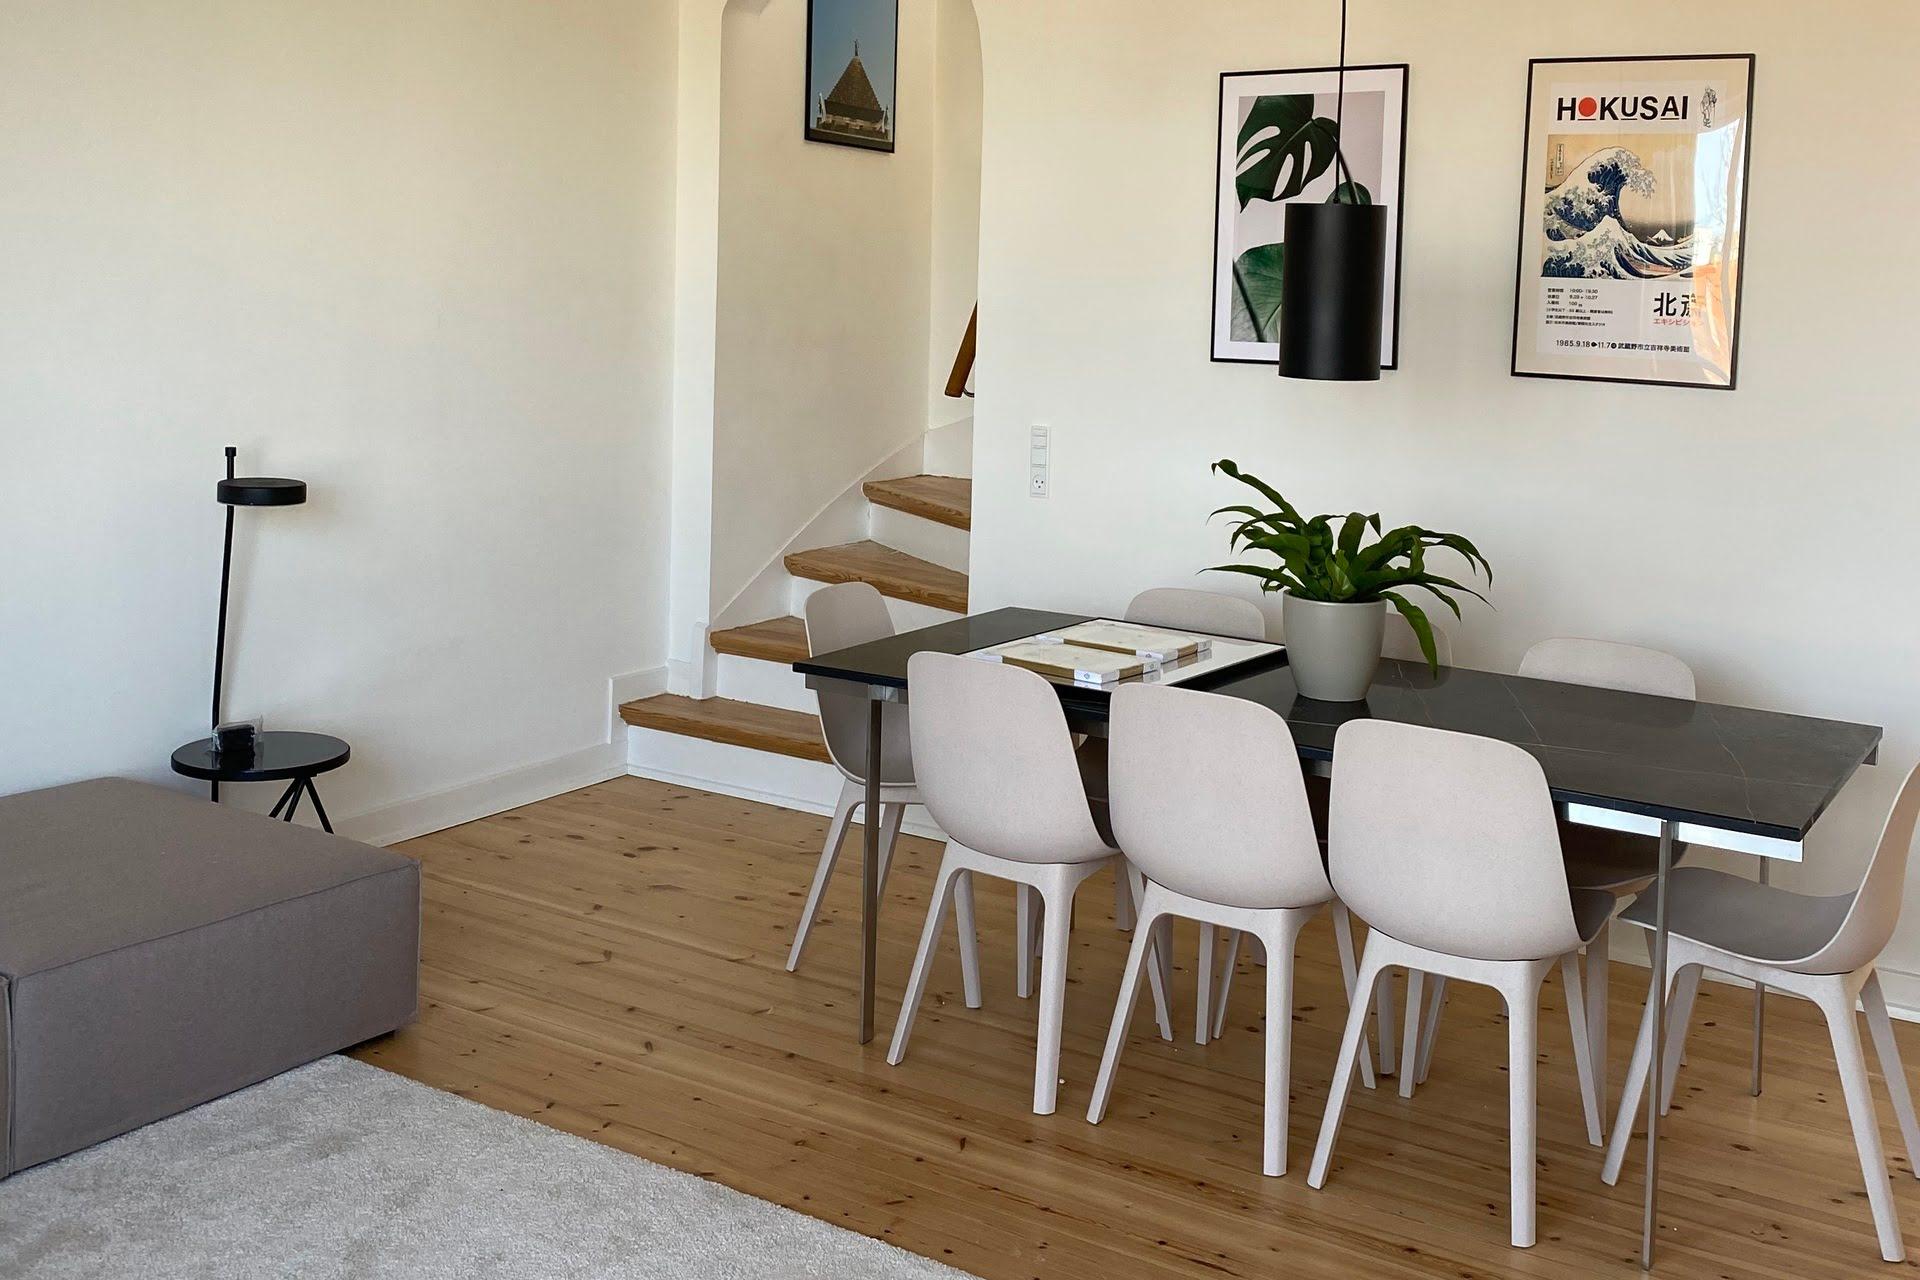 A dining area of one of the Movinn Coliving apartments